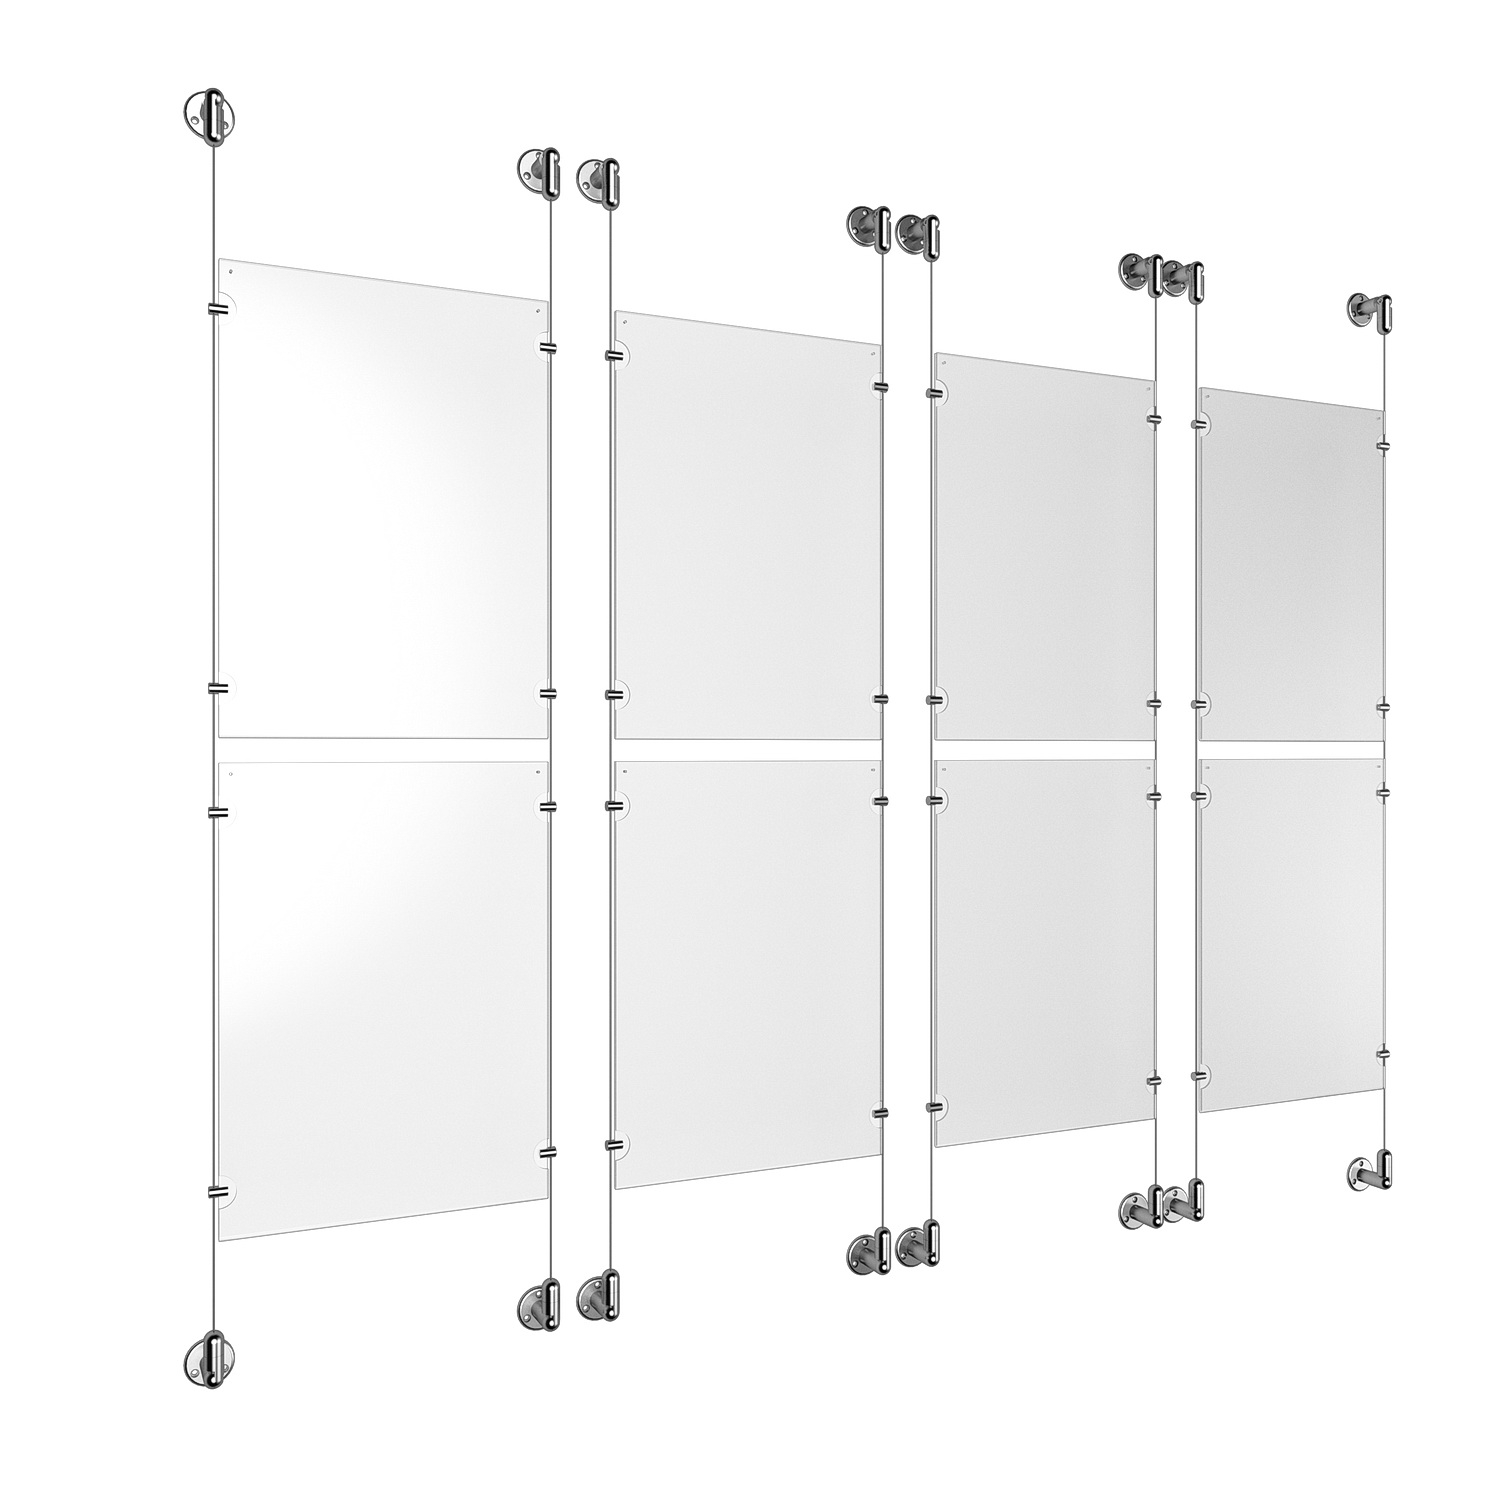 (8) 11'' Width x 17'' Height Clear Acrylic Frame & (8) Aluminum Clear Anodized Adjustable Angle Cable Systems with (32) Single-Sided Panel Grippers